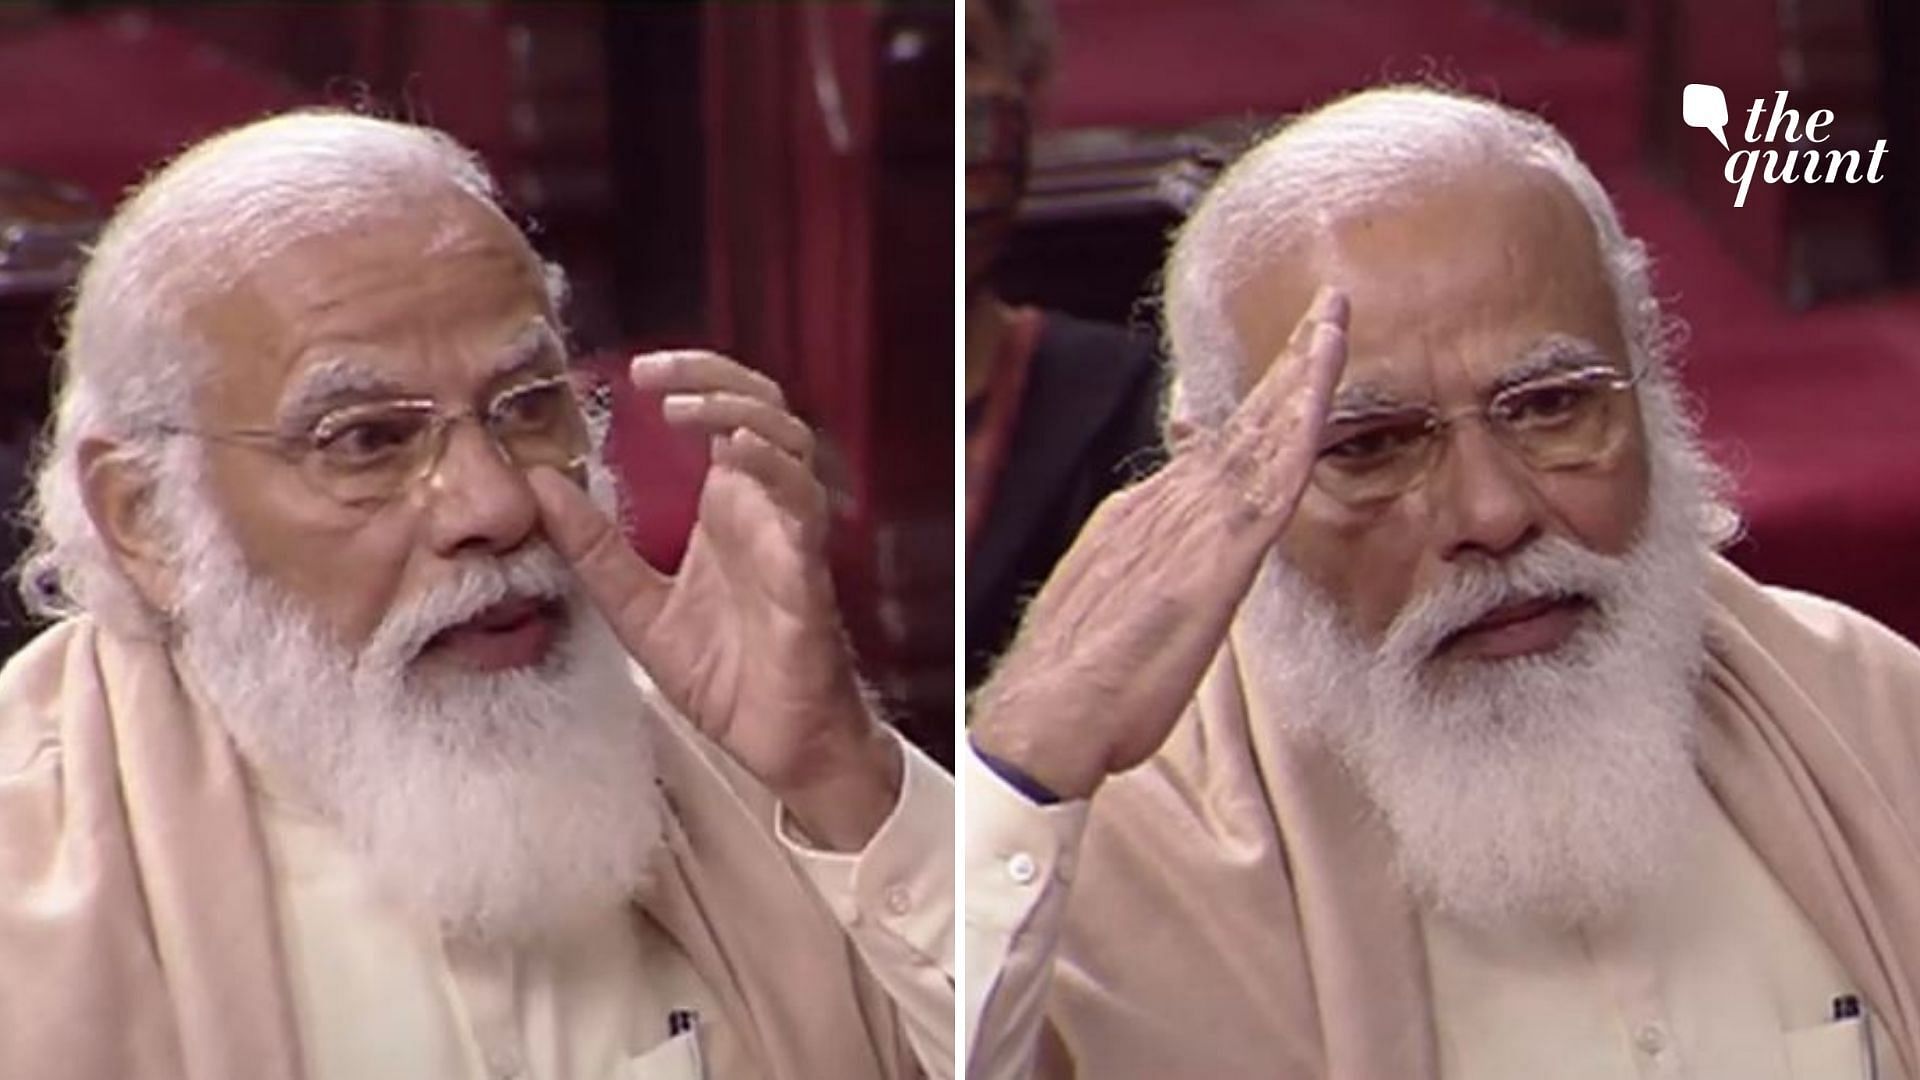 PM Modi gets emotional while reminiscing an incident involving Congress leader Ghulam Nabi Azad, during farewell to retiring members in Rajya Sabha